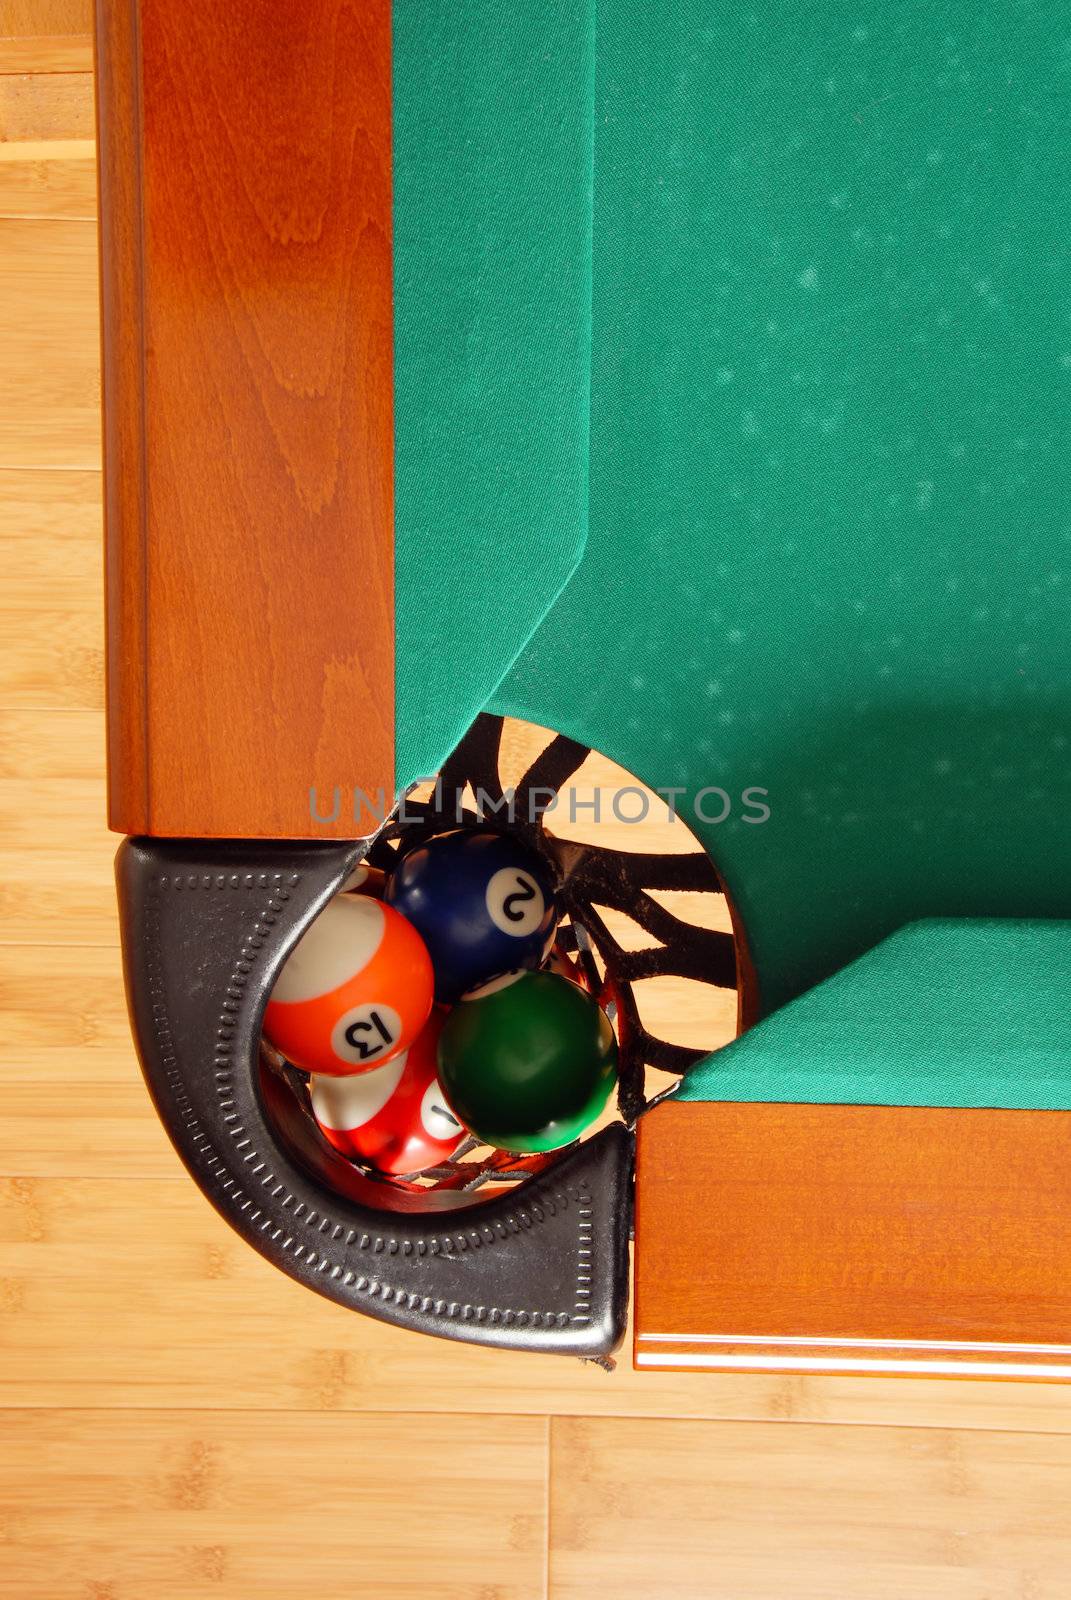 Balls in Billiards table pocket by simply